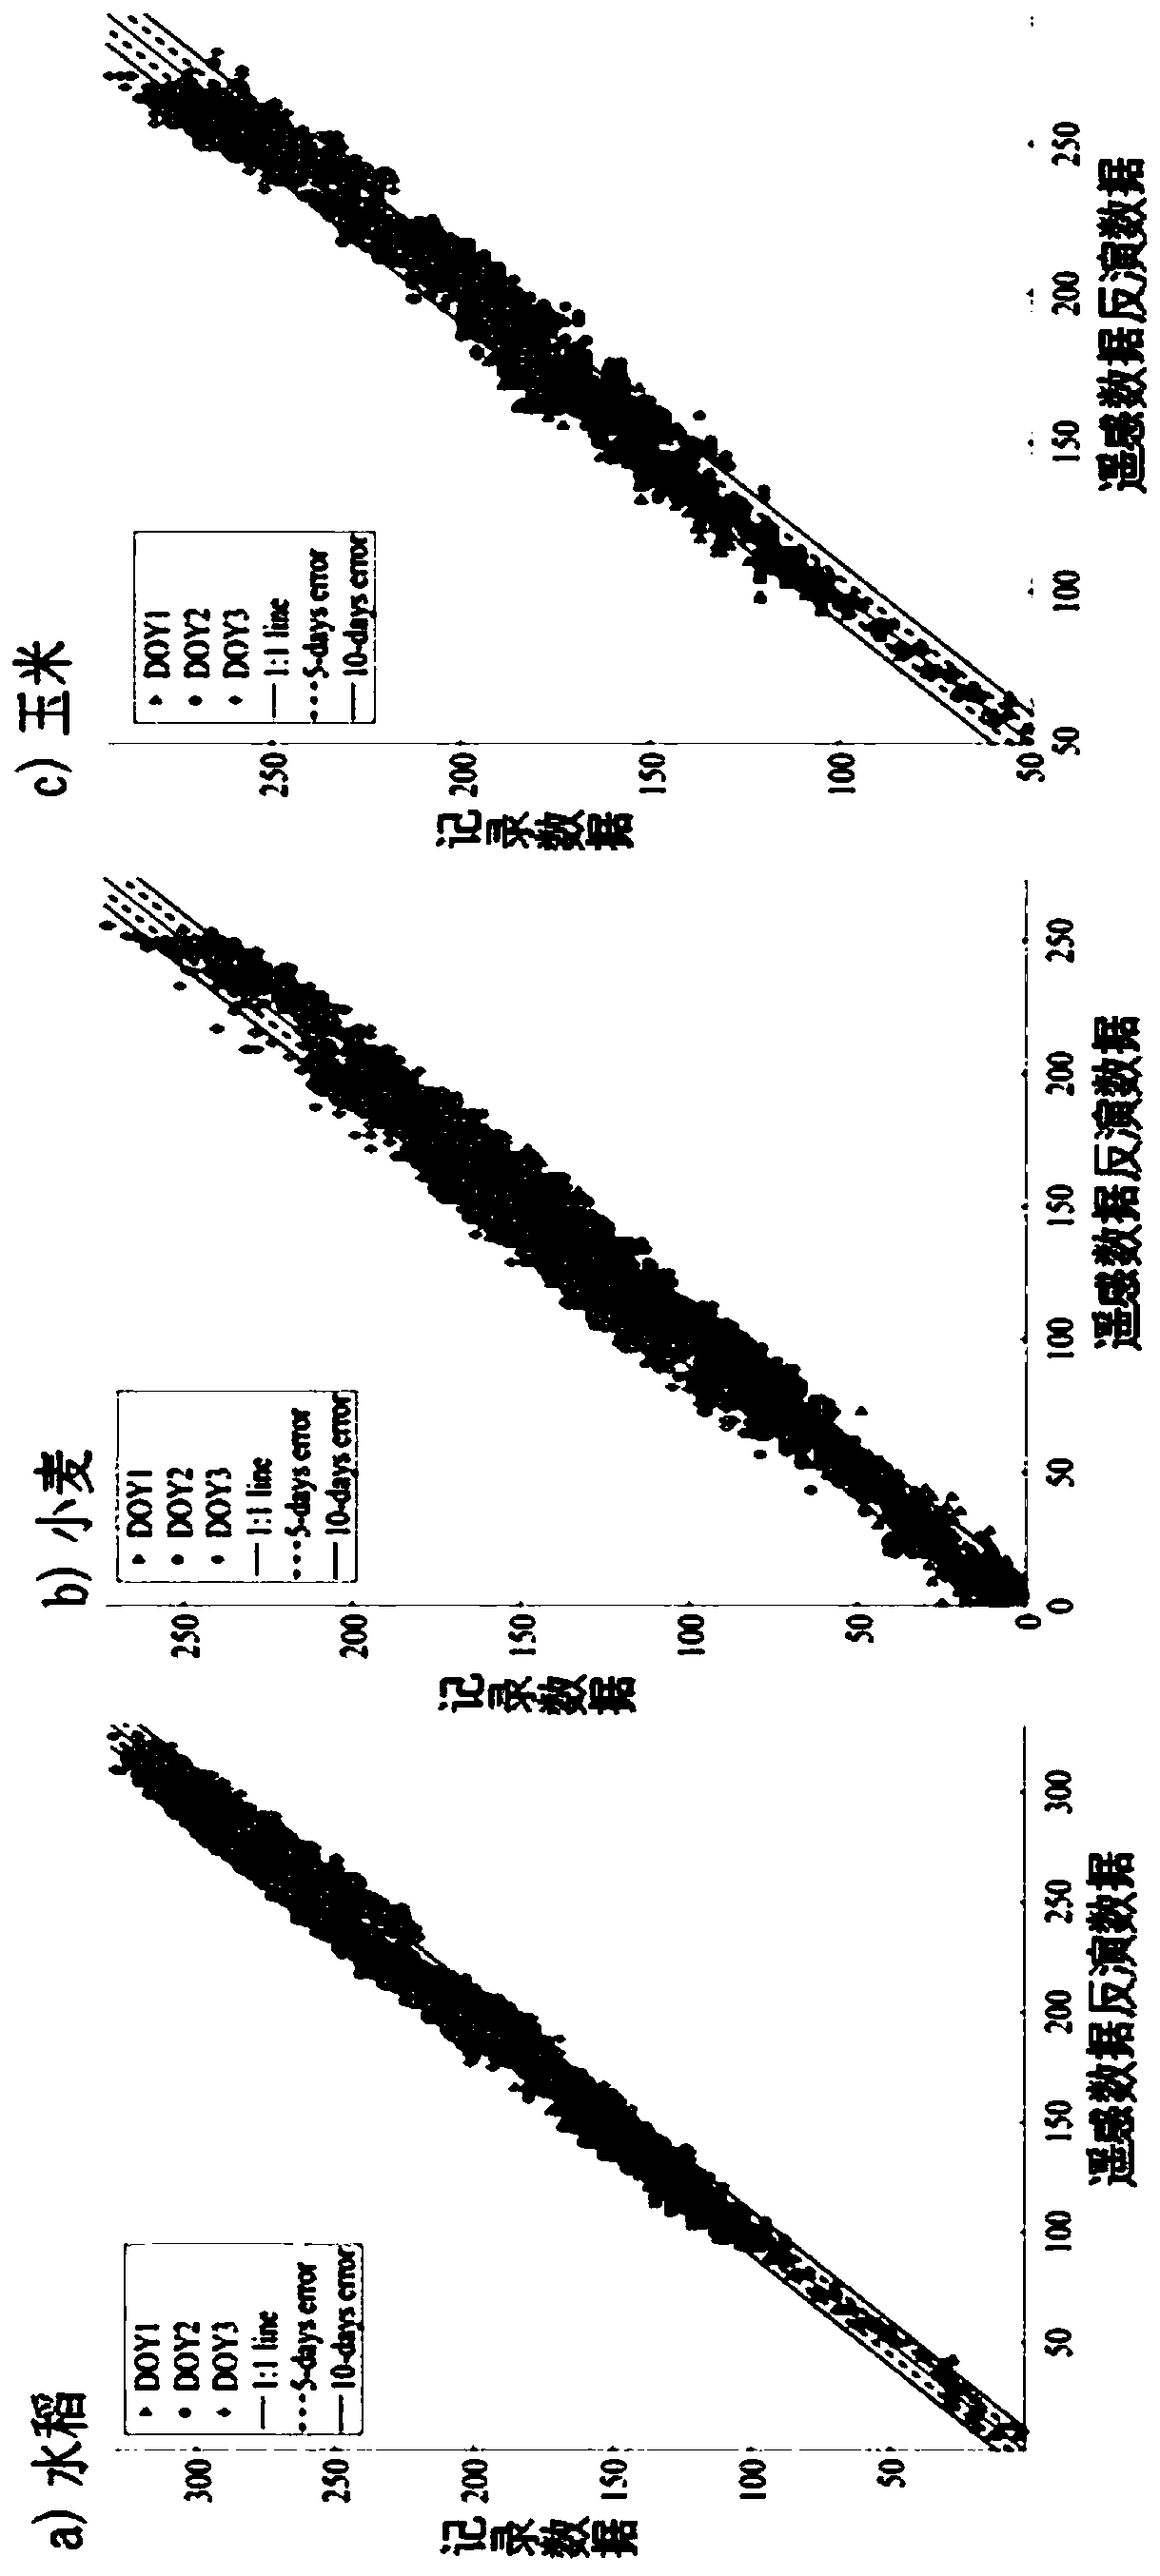 Method for rapidly extracting crop planting area and phenological information in large range